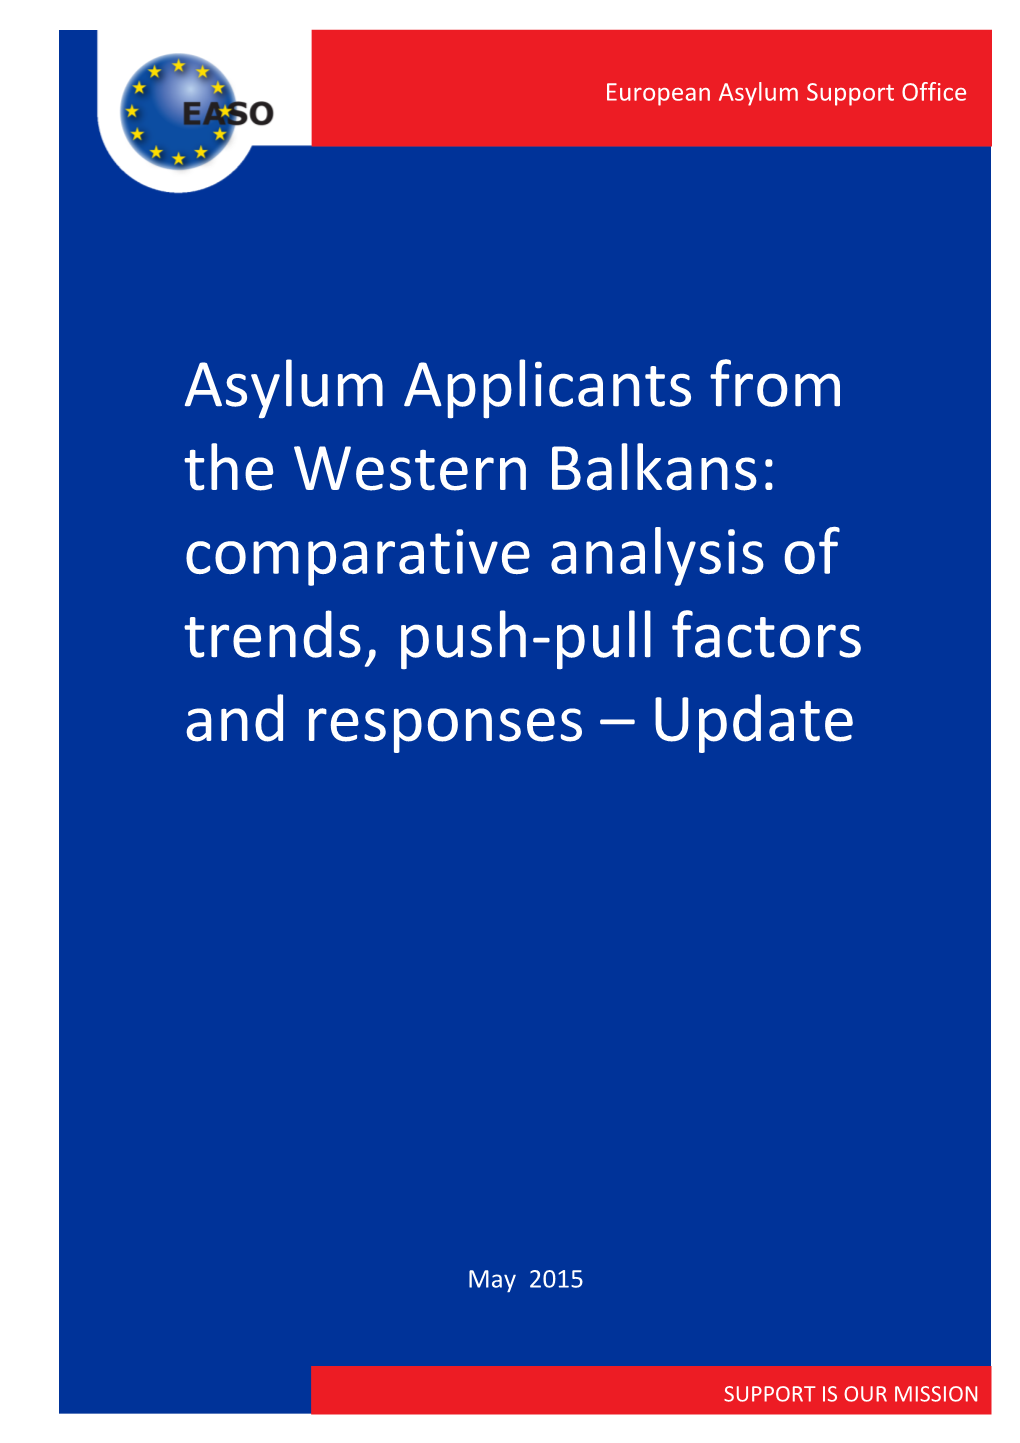 Asylum Applicants from the Western Balkans: Comparative Analysis of Trends, Push-Pull Factors and Responses – Update